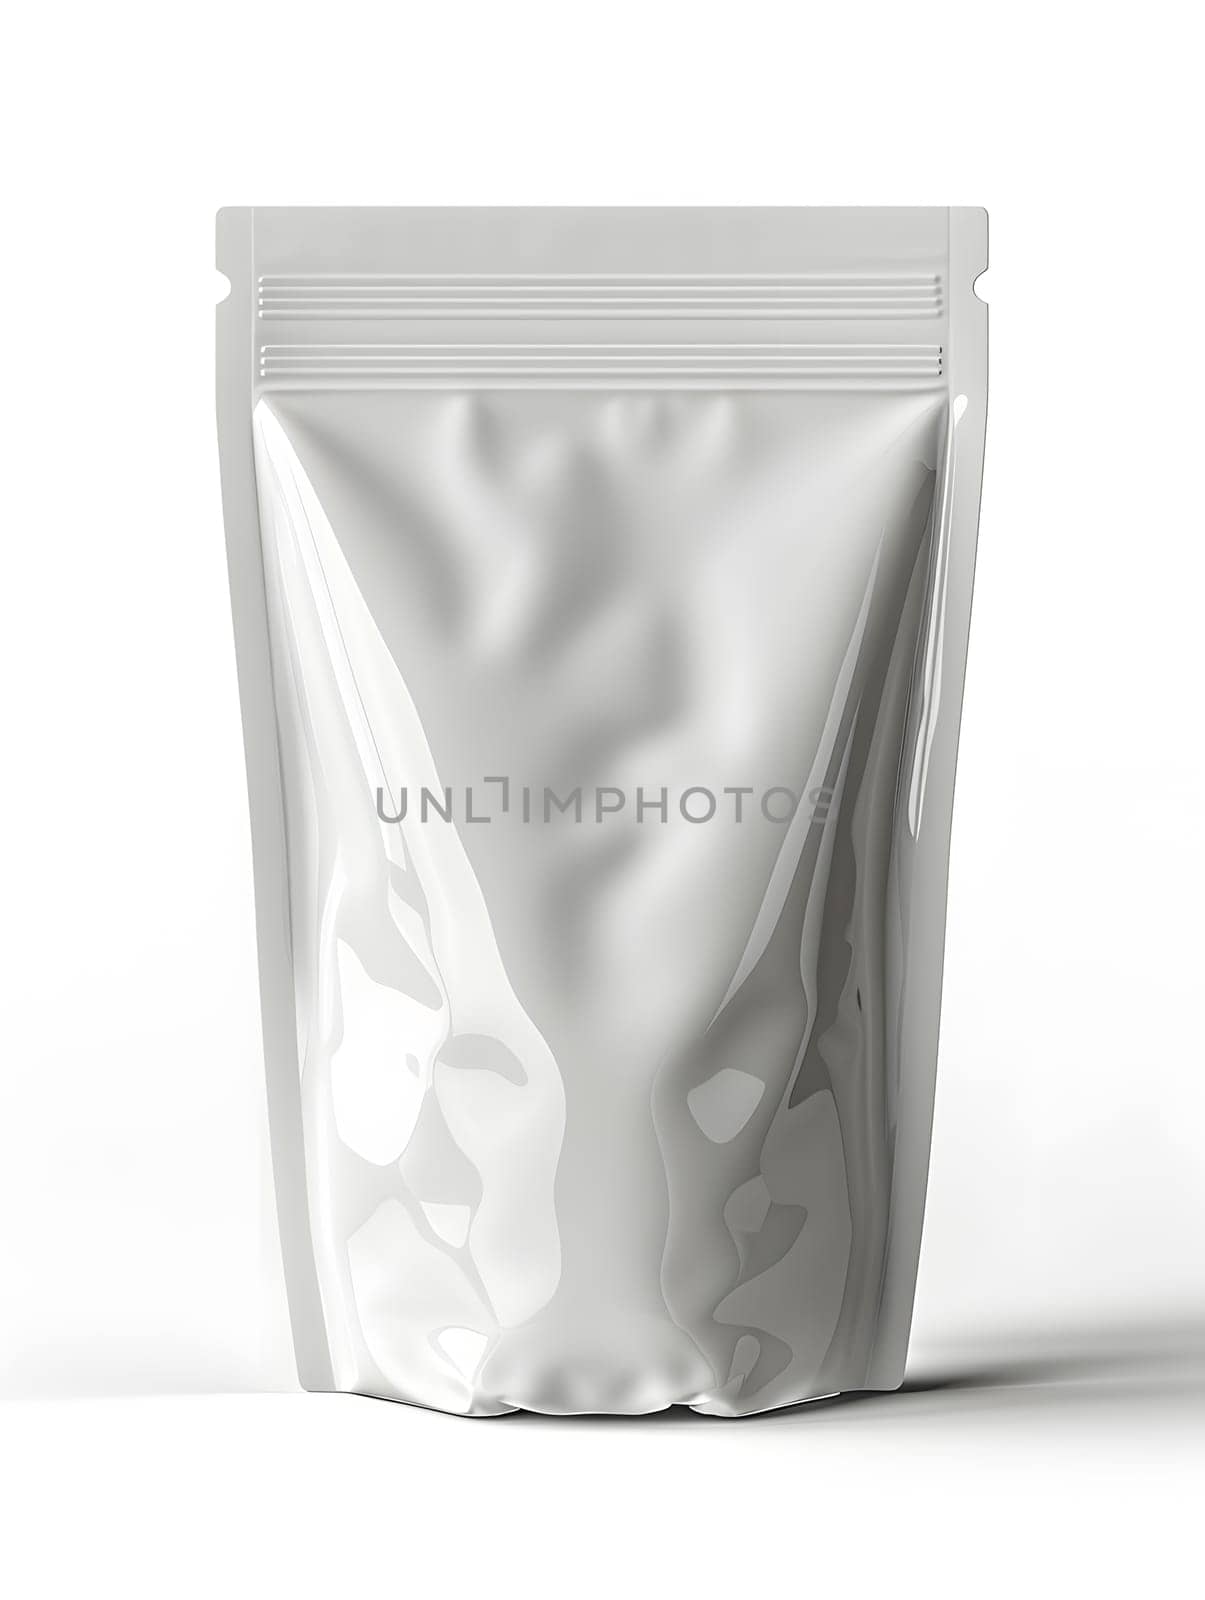 A white plastic bag with a zipper, resembling a sculpture, on a white background. The artifact mimics a rectangle shape often seen with drinkware and serveware